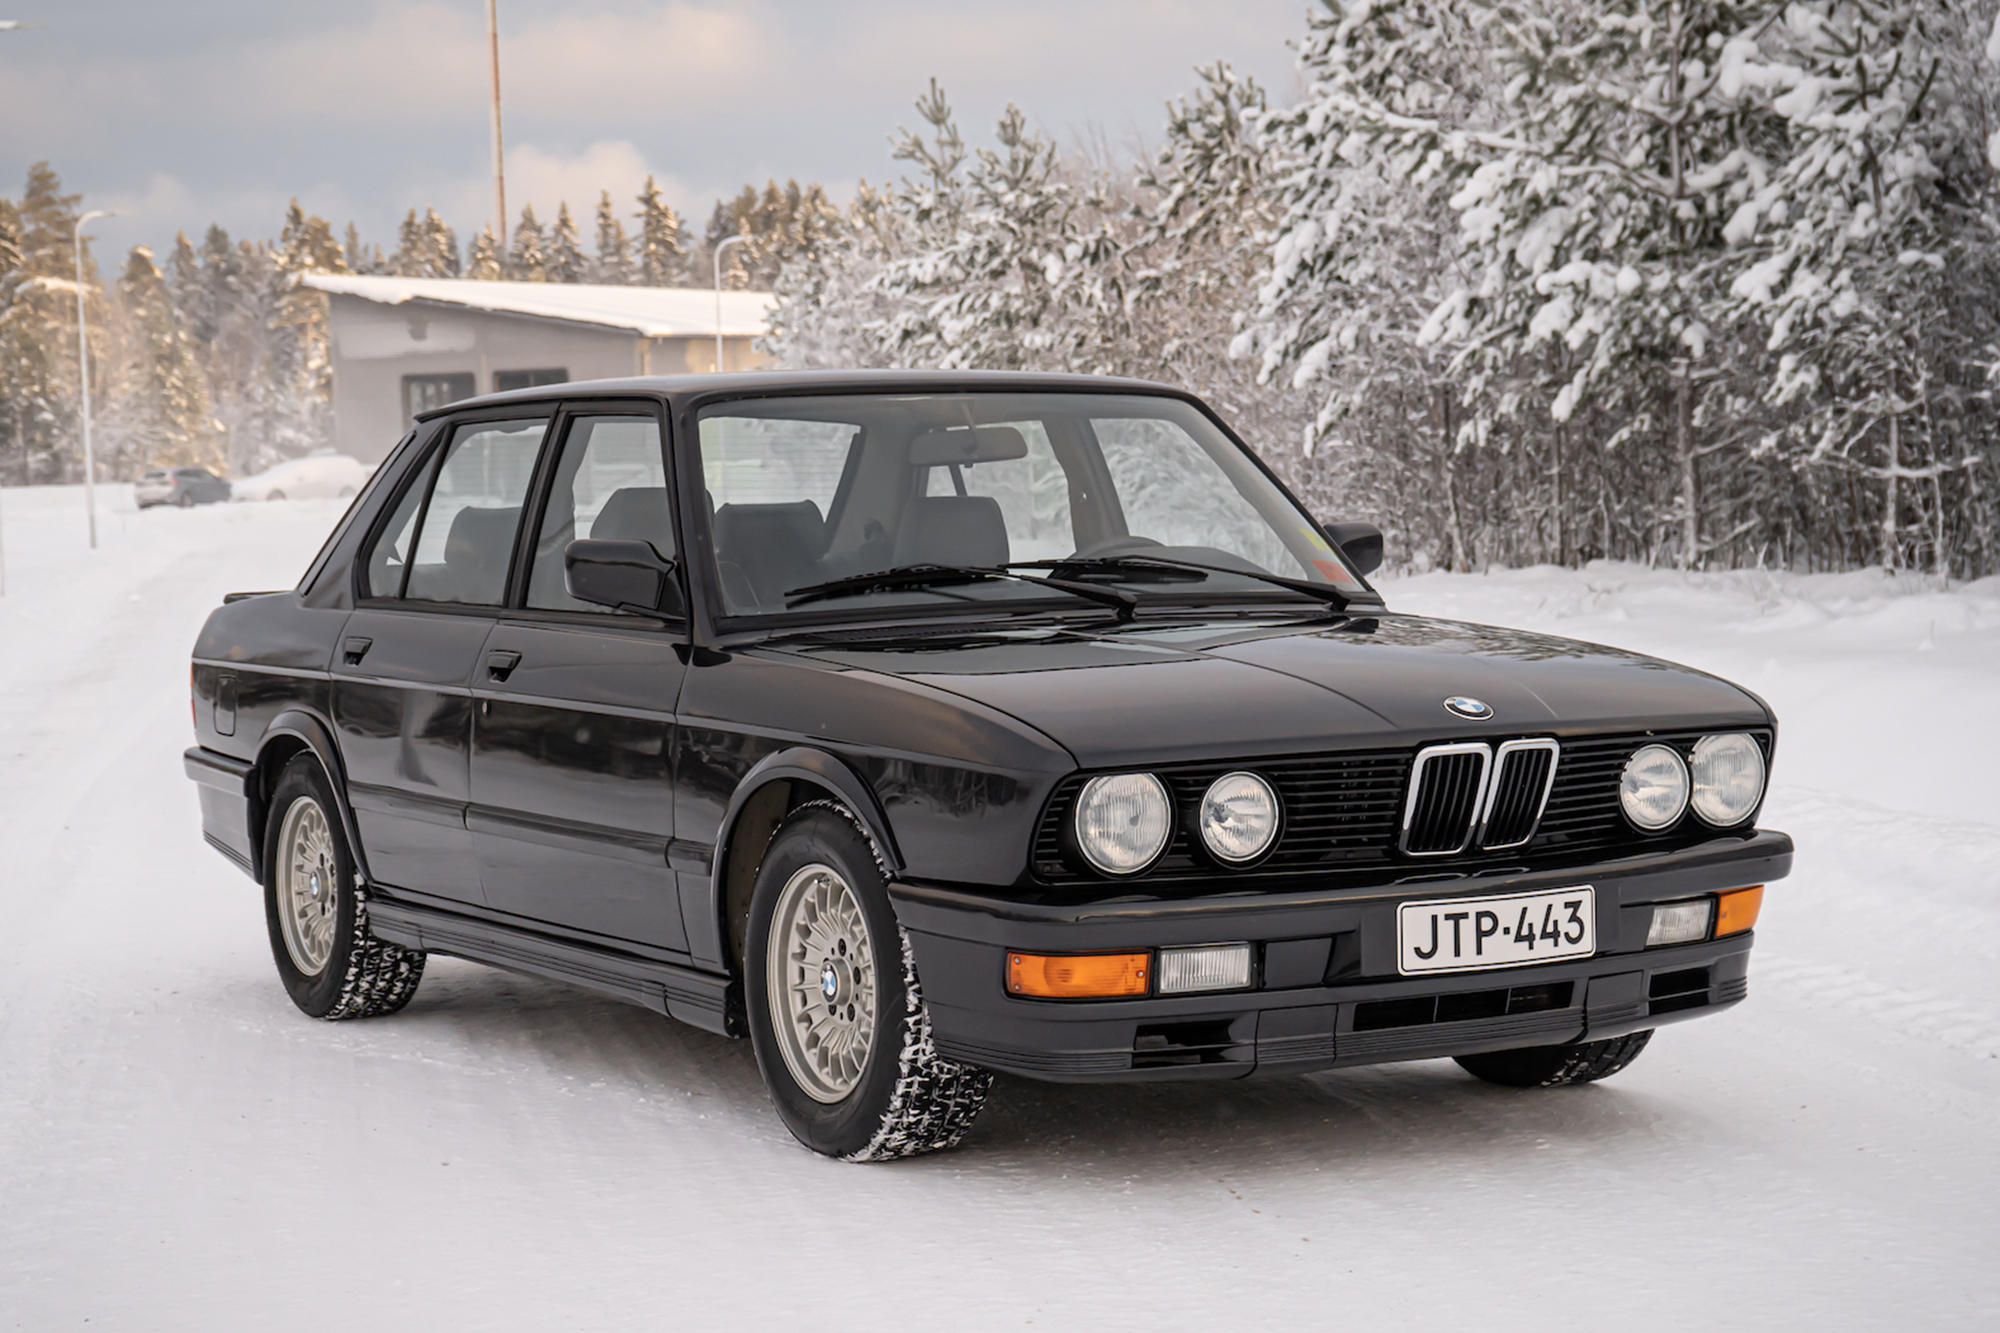 1986 BMW (E28) M535I for sale by auction in Nykarleby, Finland image